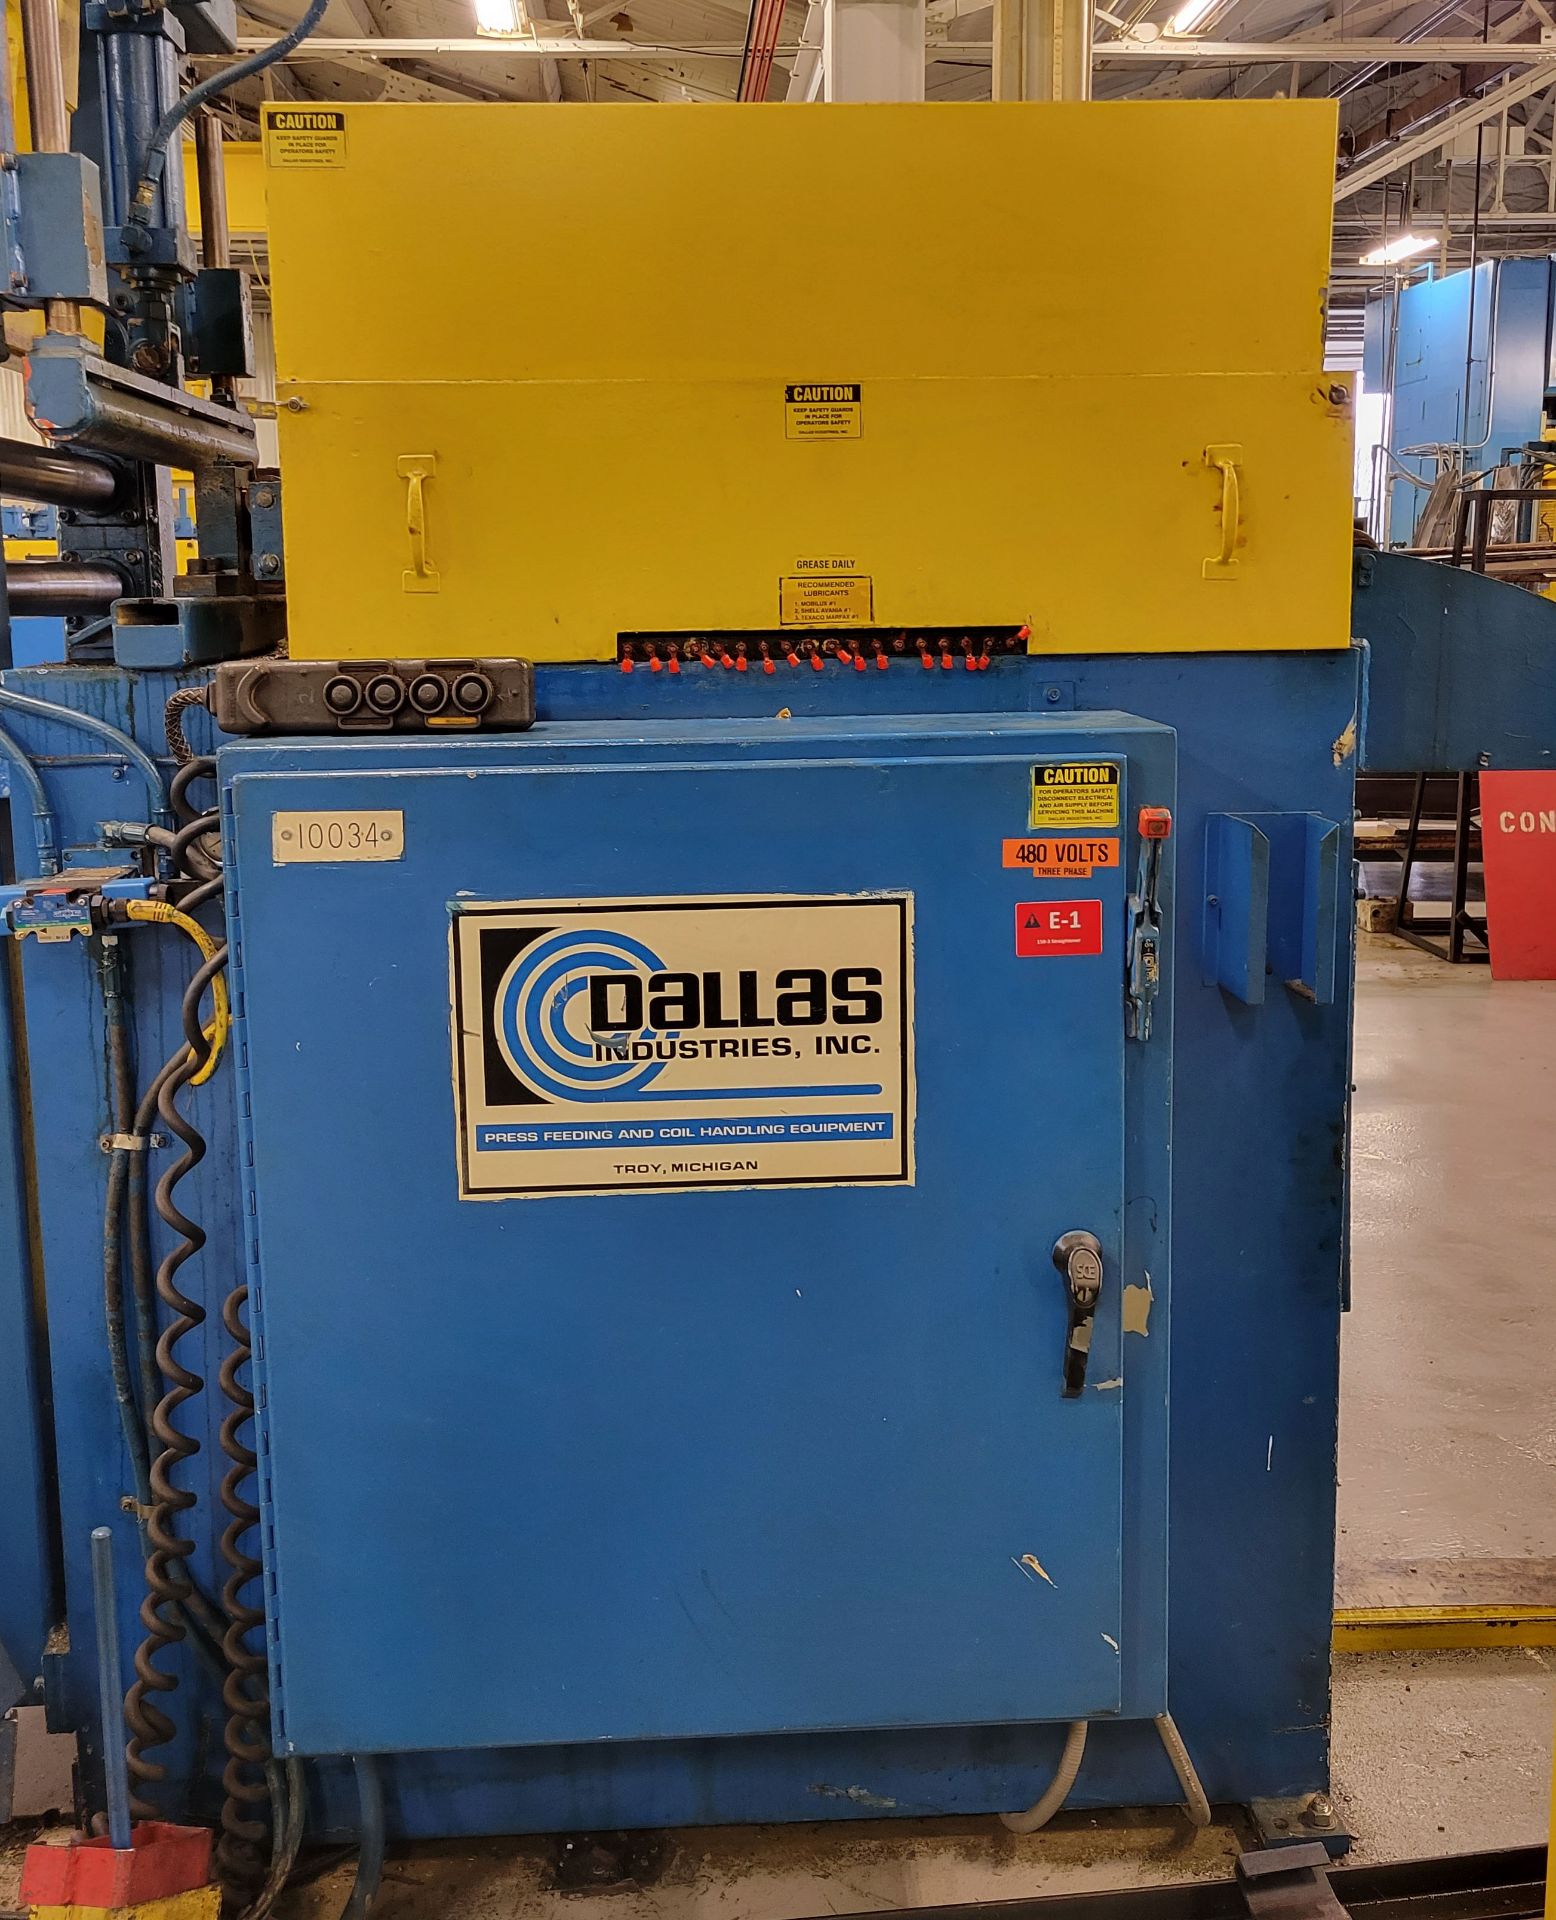 DALLAS DPS-3-9-18-RH (5) ROLL STRAIGHTENER WITH 0.125" X 18"W CAPACITY, S/N: 20847 (CI) LOCATED IN